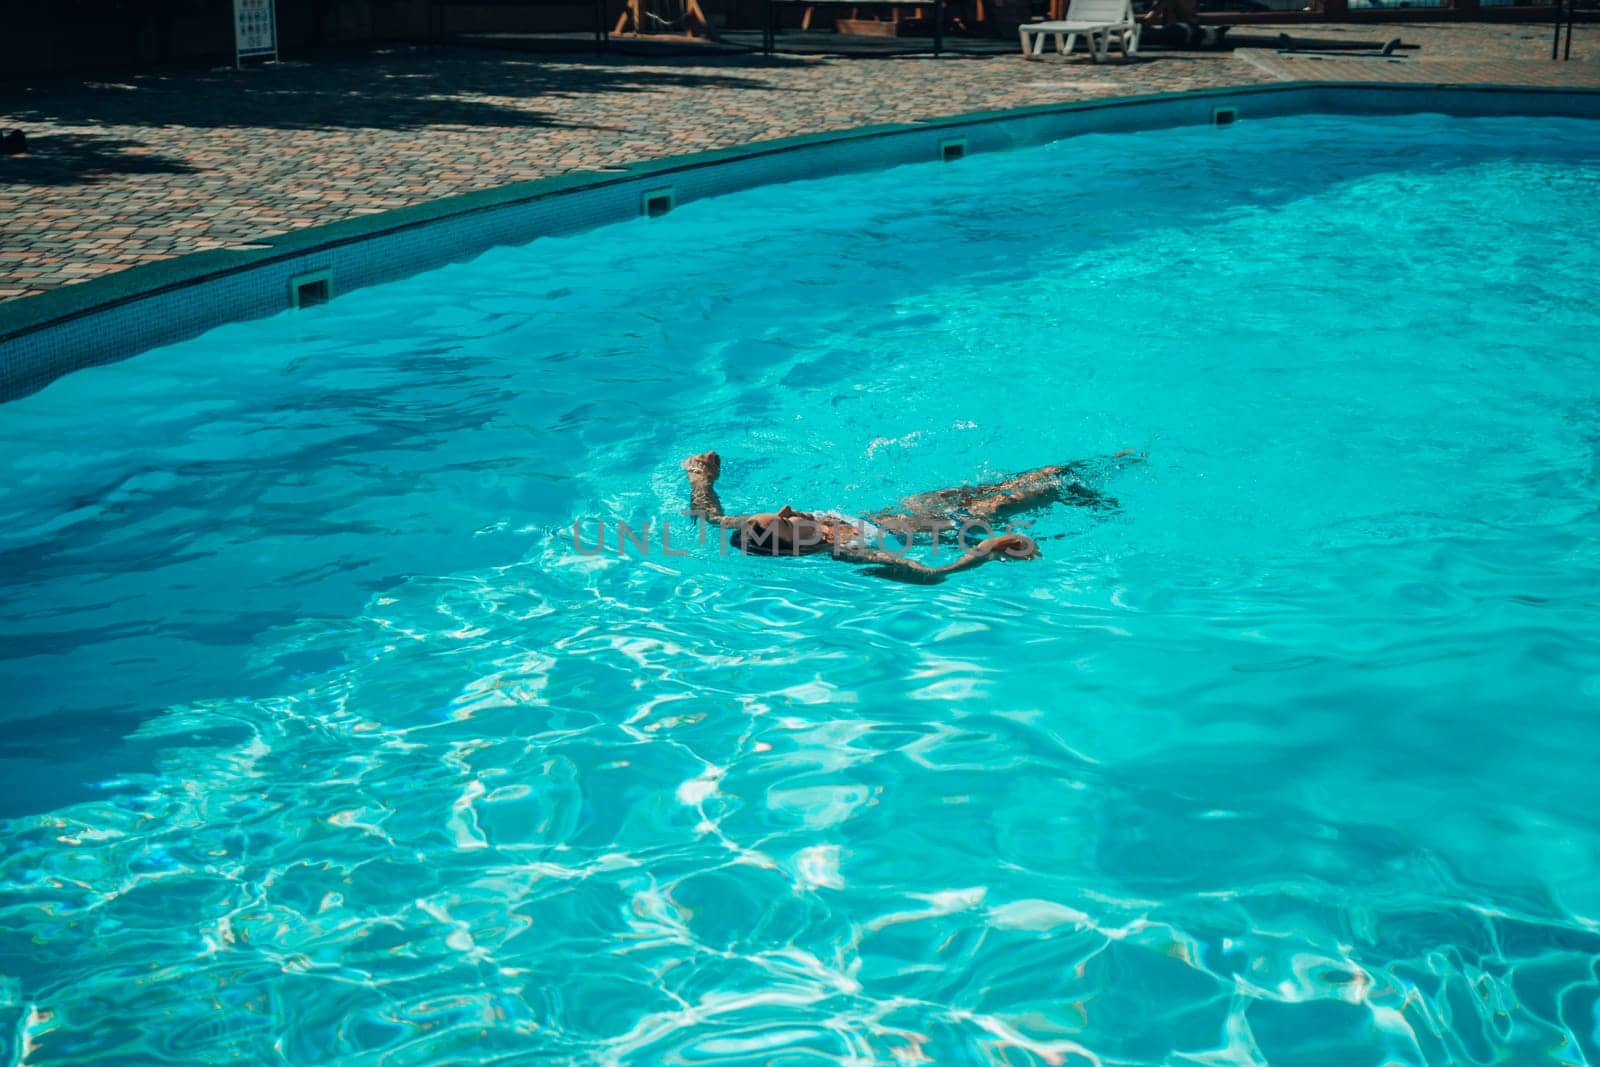 A woman is swimming in a pool. The pool is surrounded by a fence and has a playground in the background